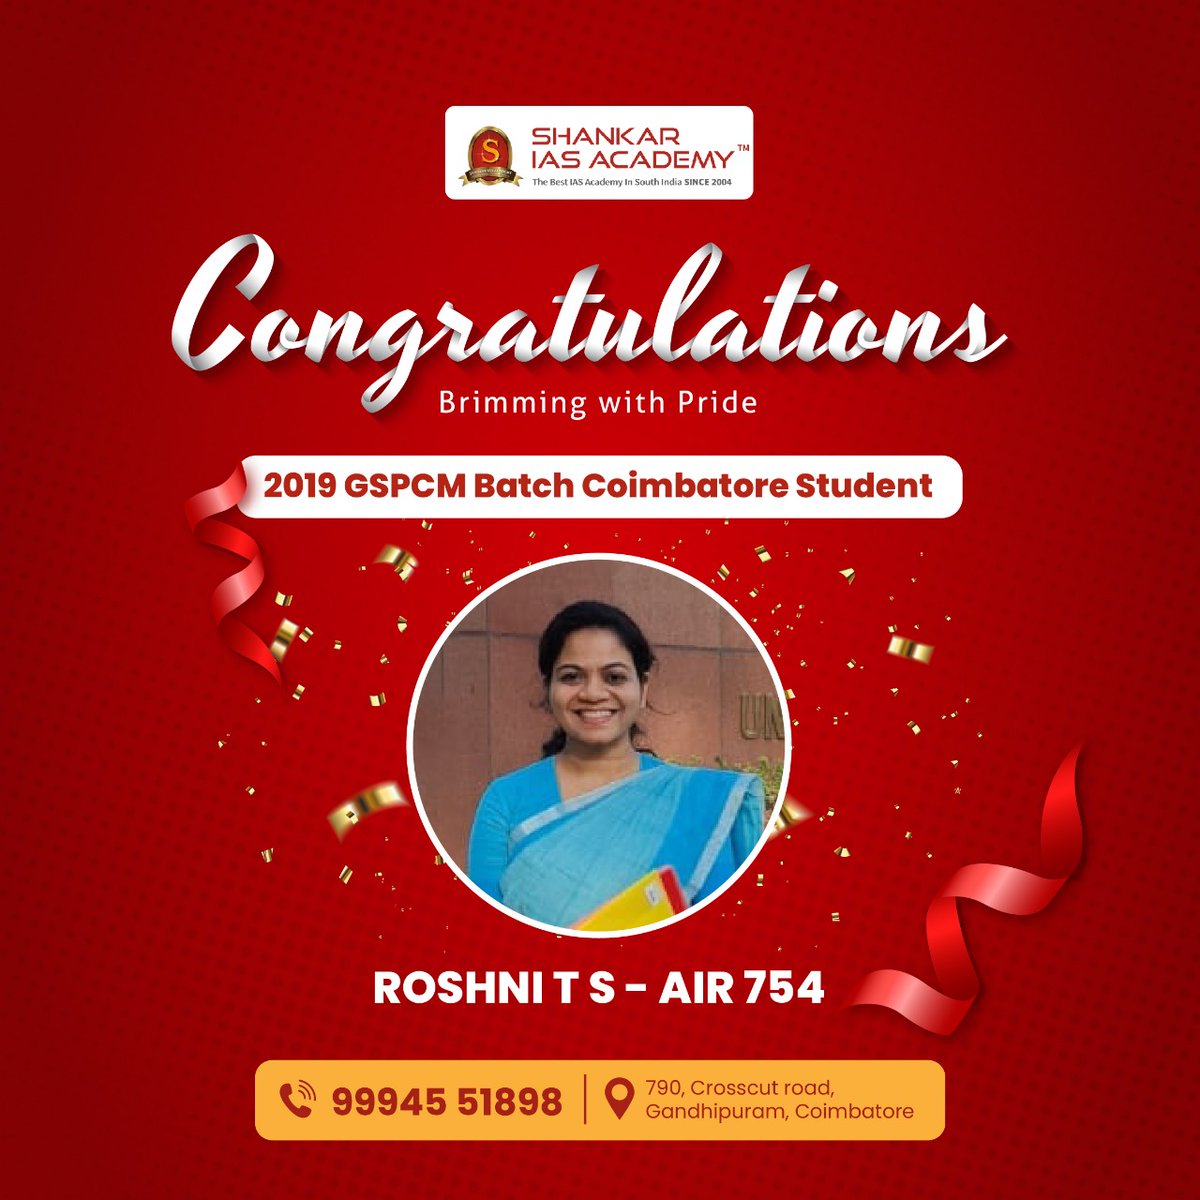 The only way to Achieve the impossible is to believe it is possible. 

Congratulations - Our GSPCM Batch Student.

Admissions Open for UPSC - CSE - 2024-25

For Details - Shankar IAS Academy Coimbatore - 9994551898

#admissionsopen #UPSC #upsccse #governmentjob #iasacademy